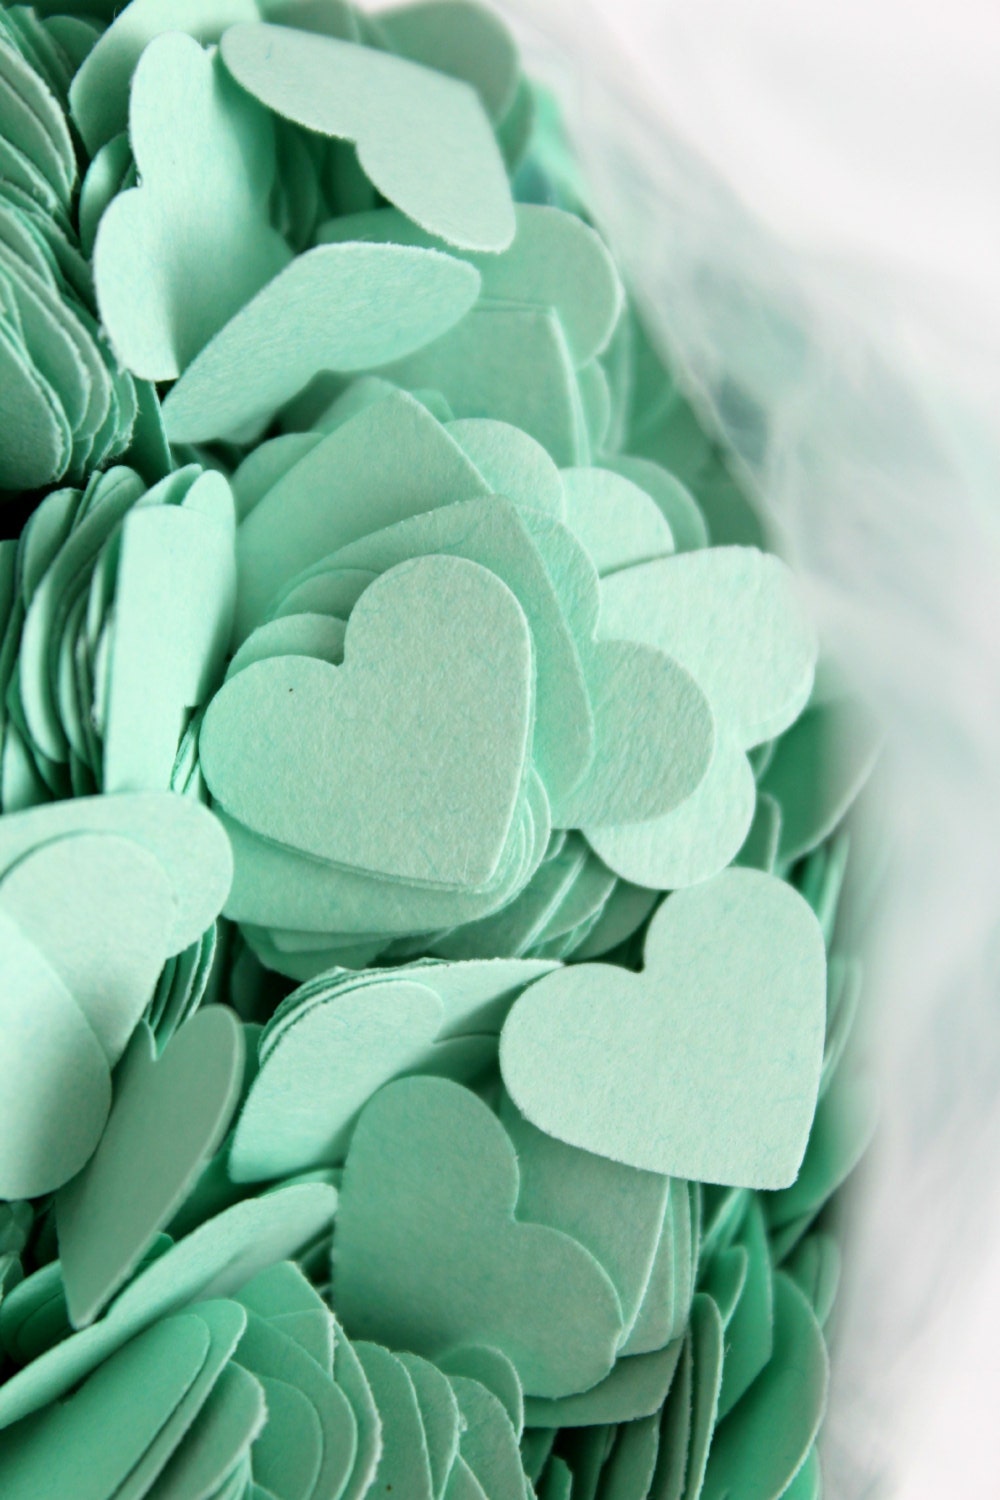 500 MINT GREEN Hearts Die cuts punches cardstock 5/8 inch -Scrapbook, cards, embellishment, confetti - FancifulChaos